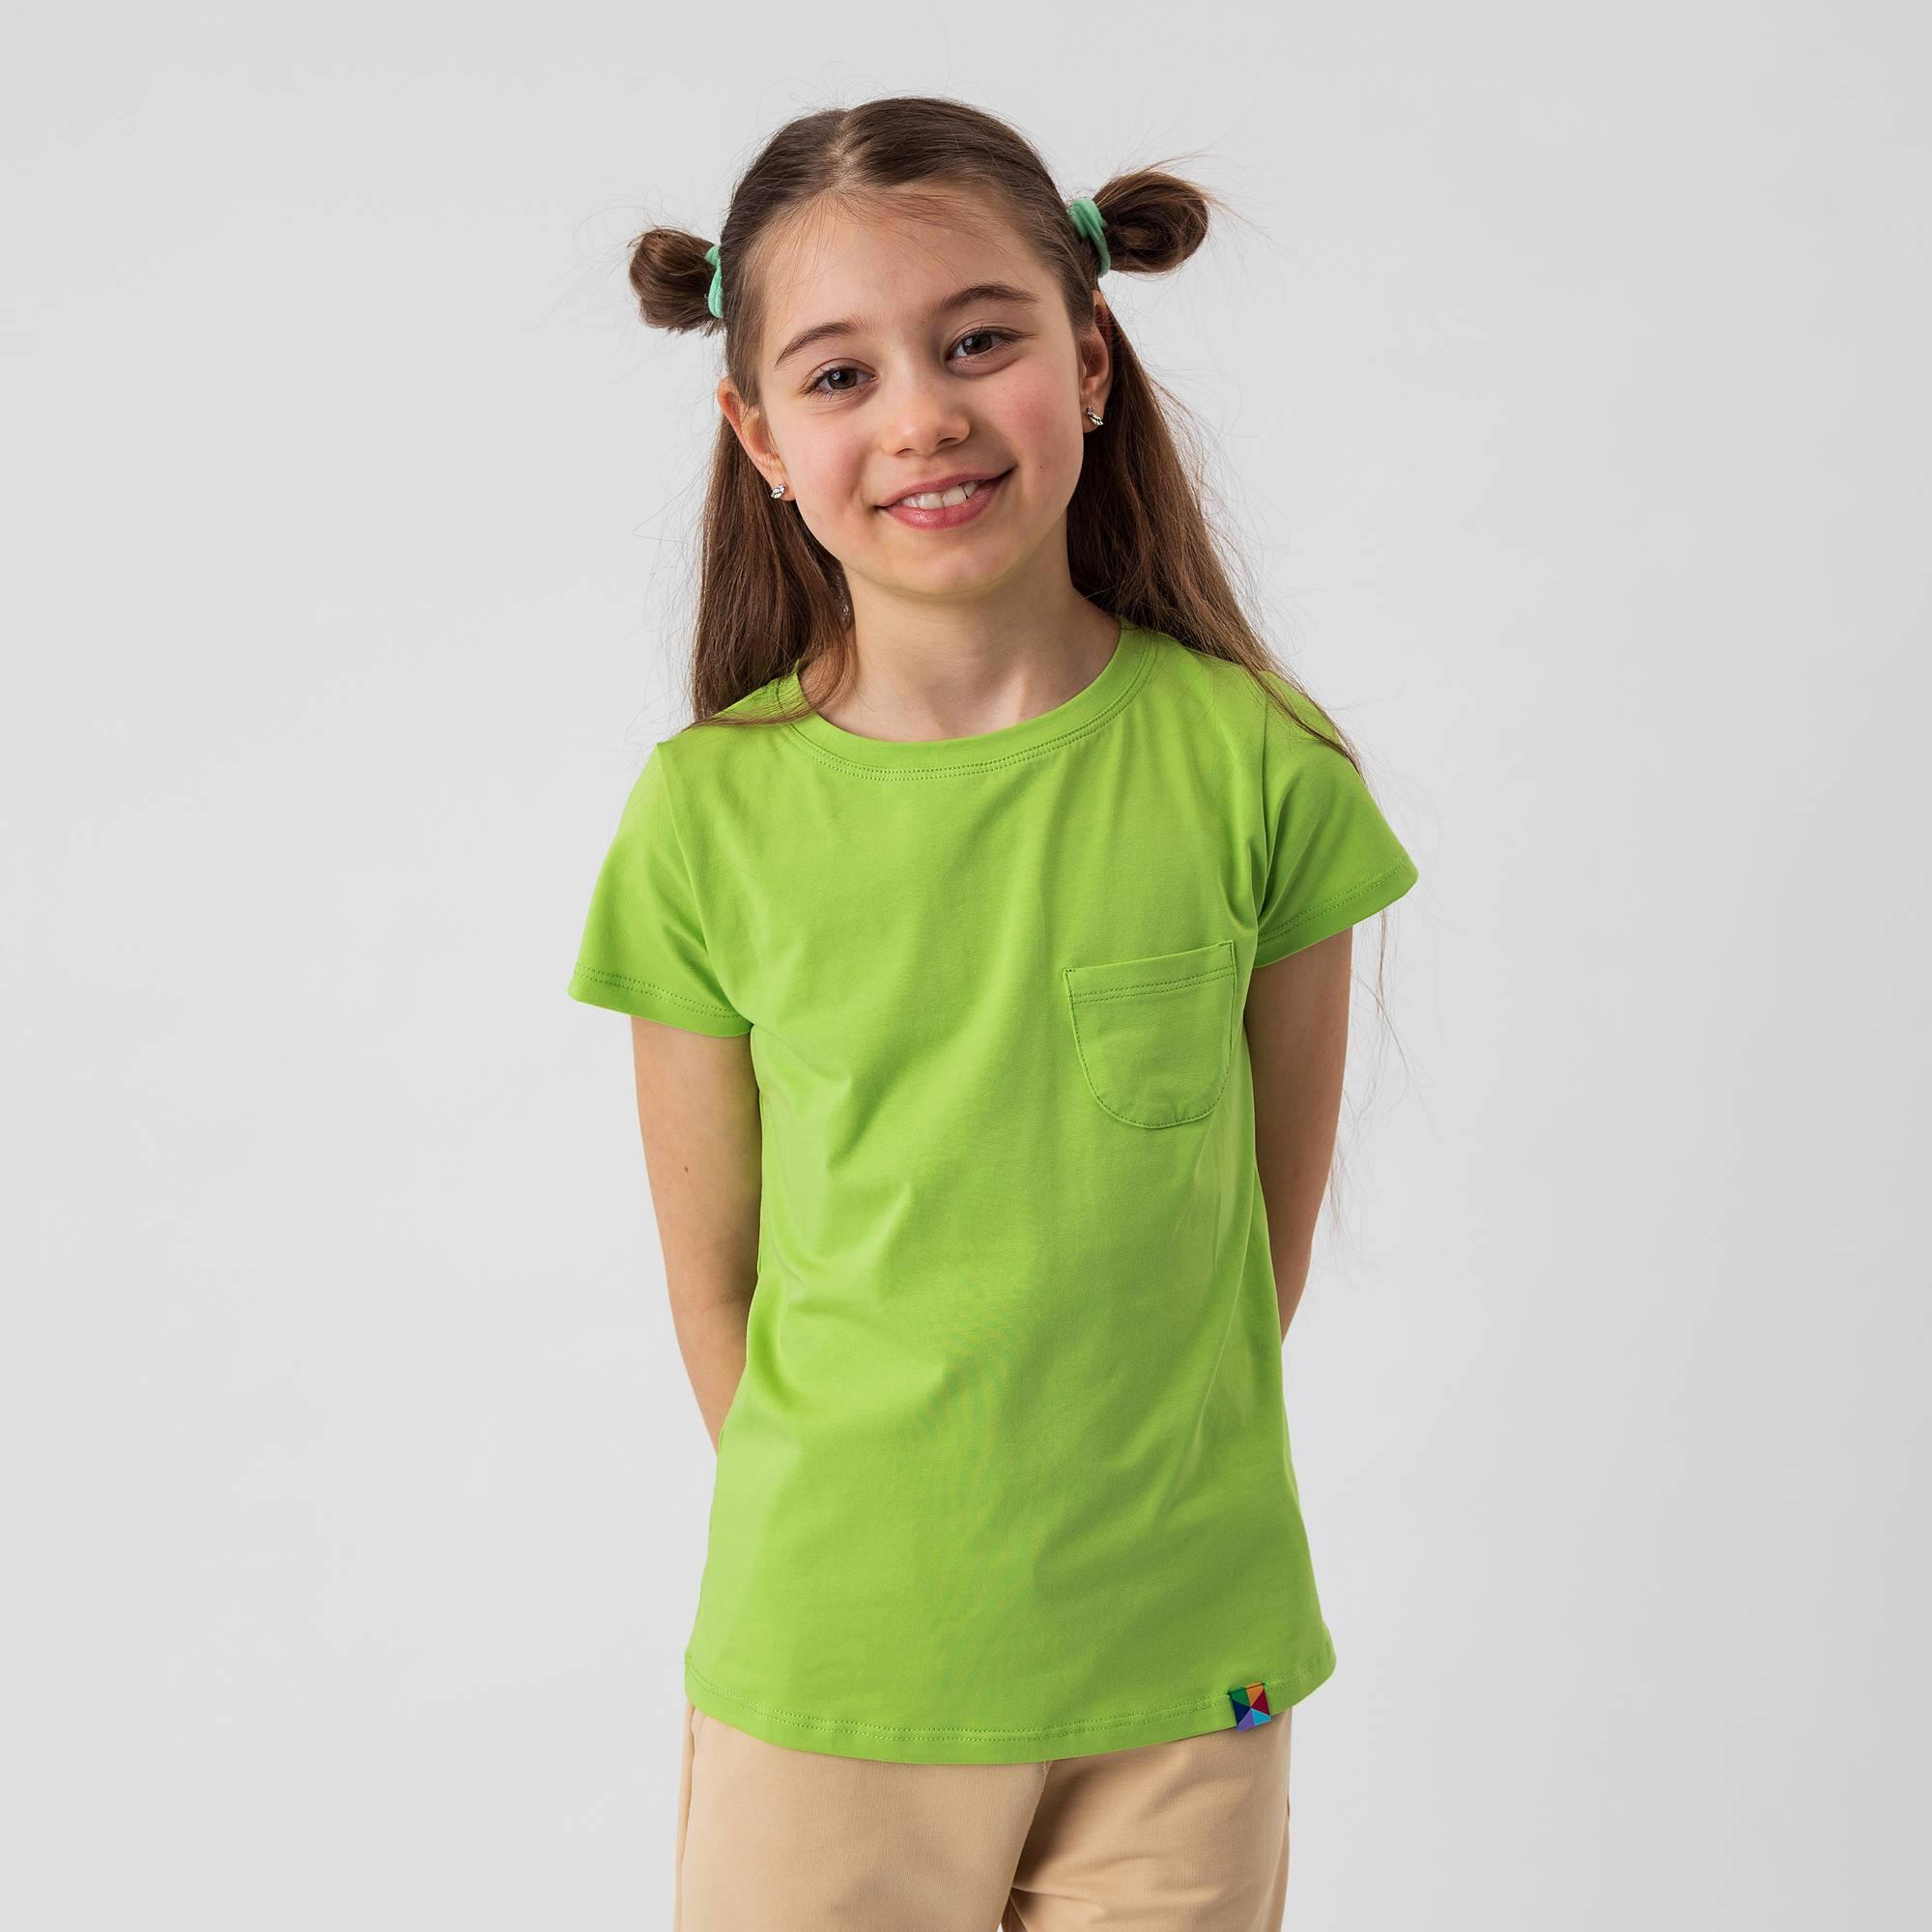 Lime green T-shirt with pocket